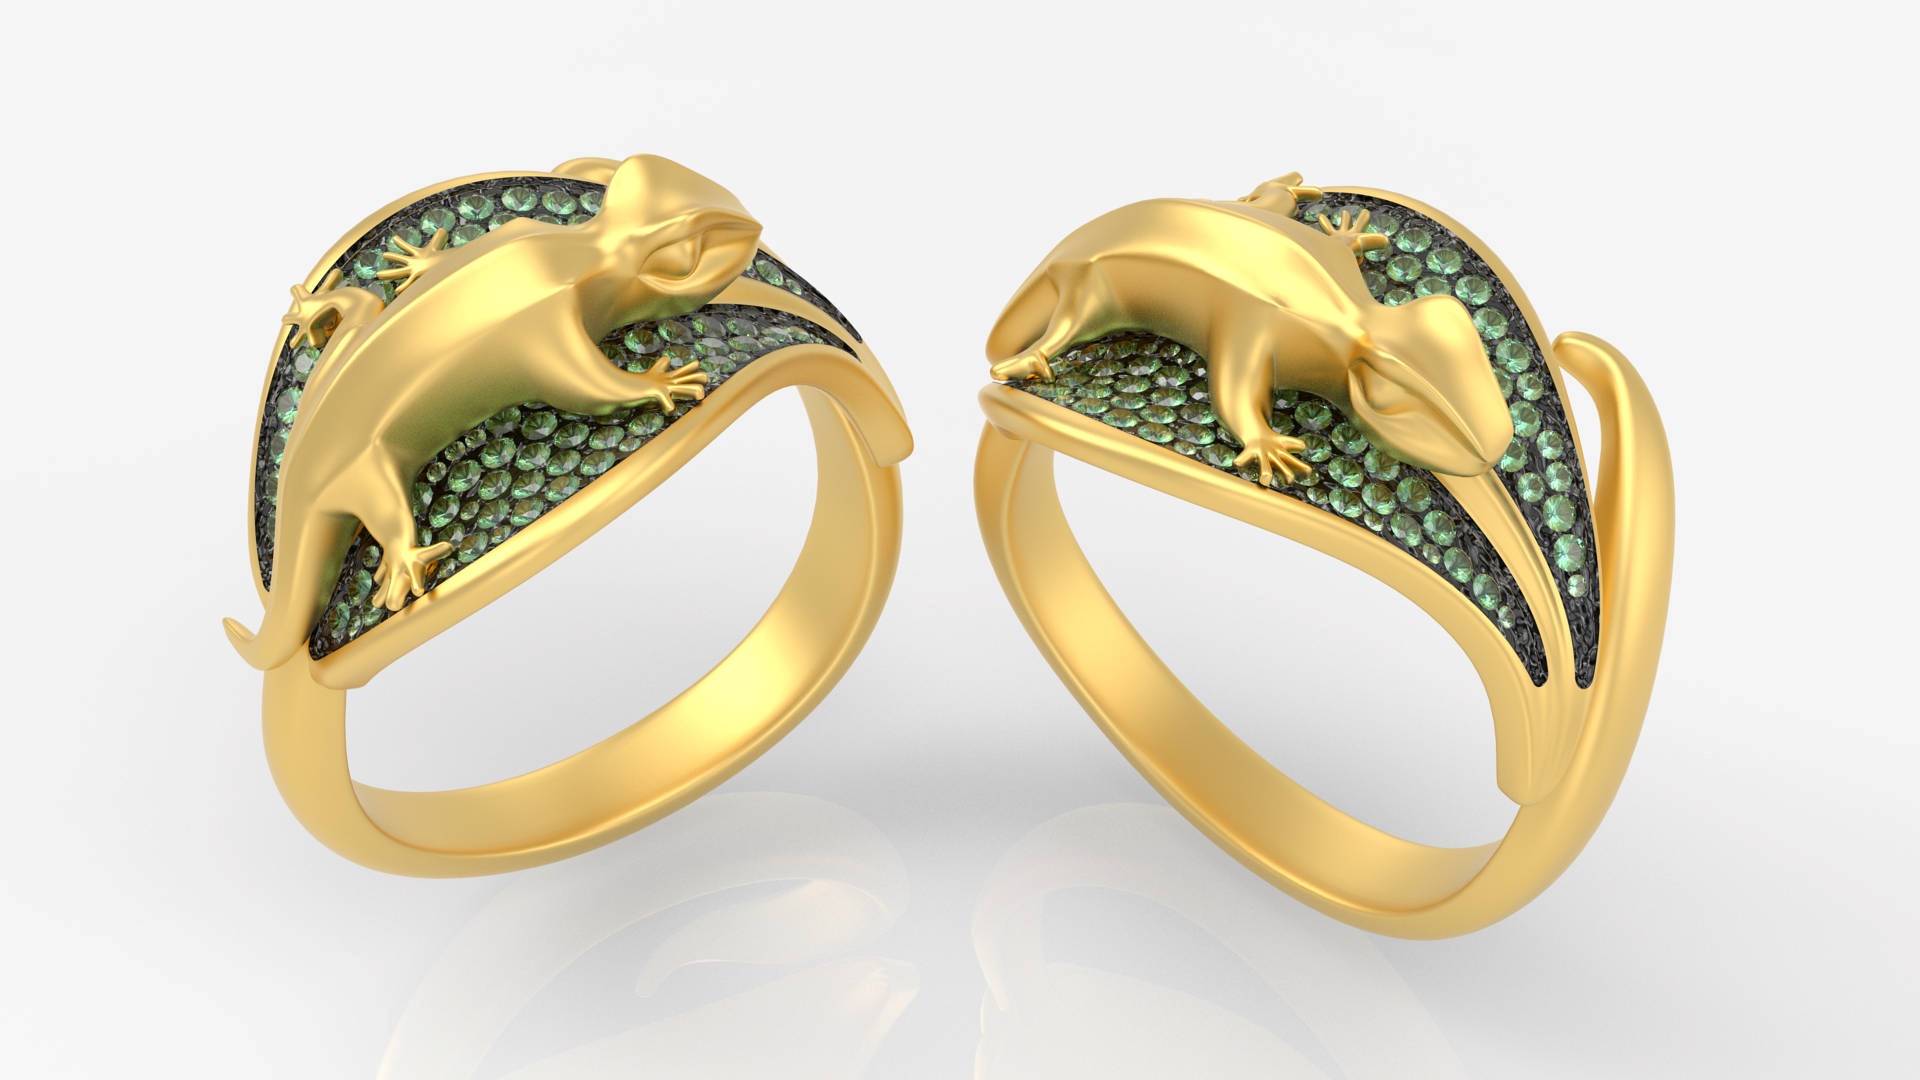 The “Geko Ring Collection,” by Luca Palmini, designed and rendered with Altair Inspire Studio. Image via Luca Palmini.